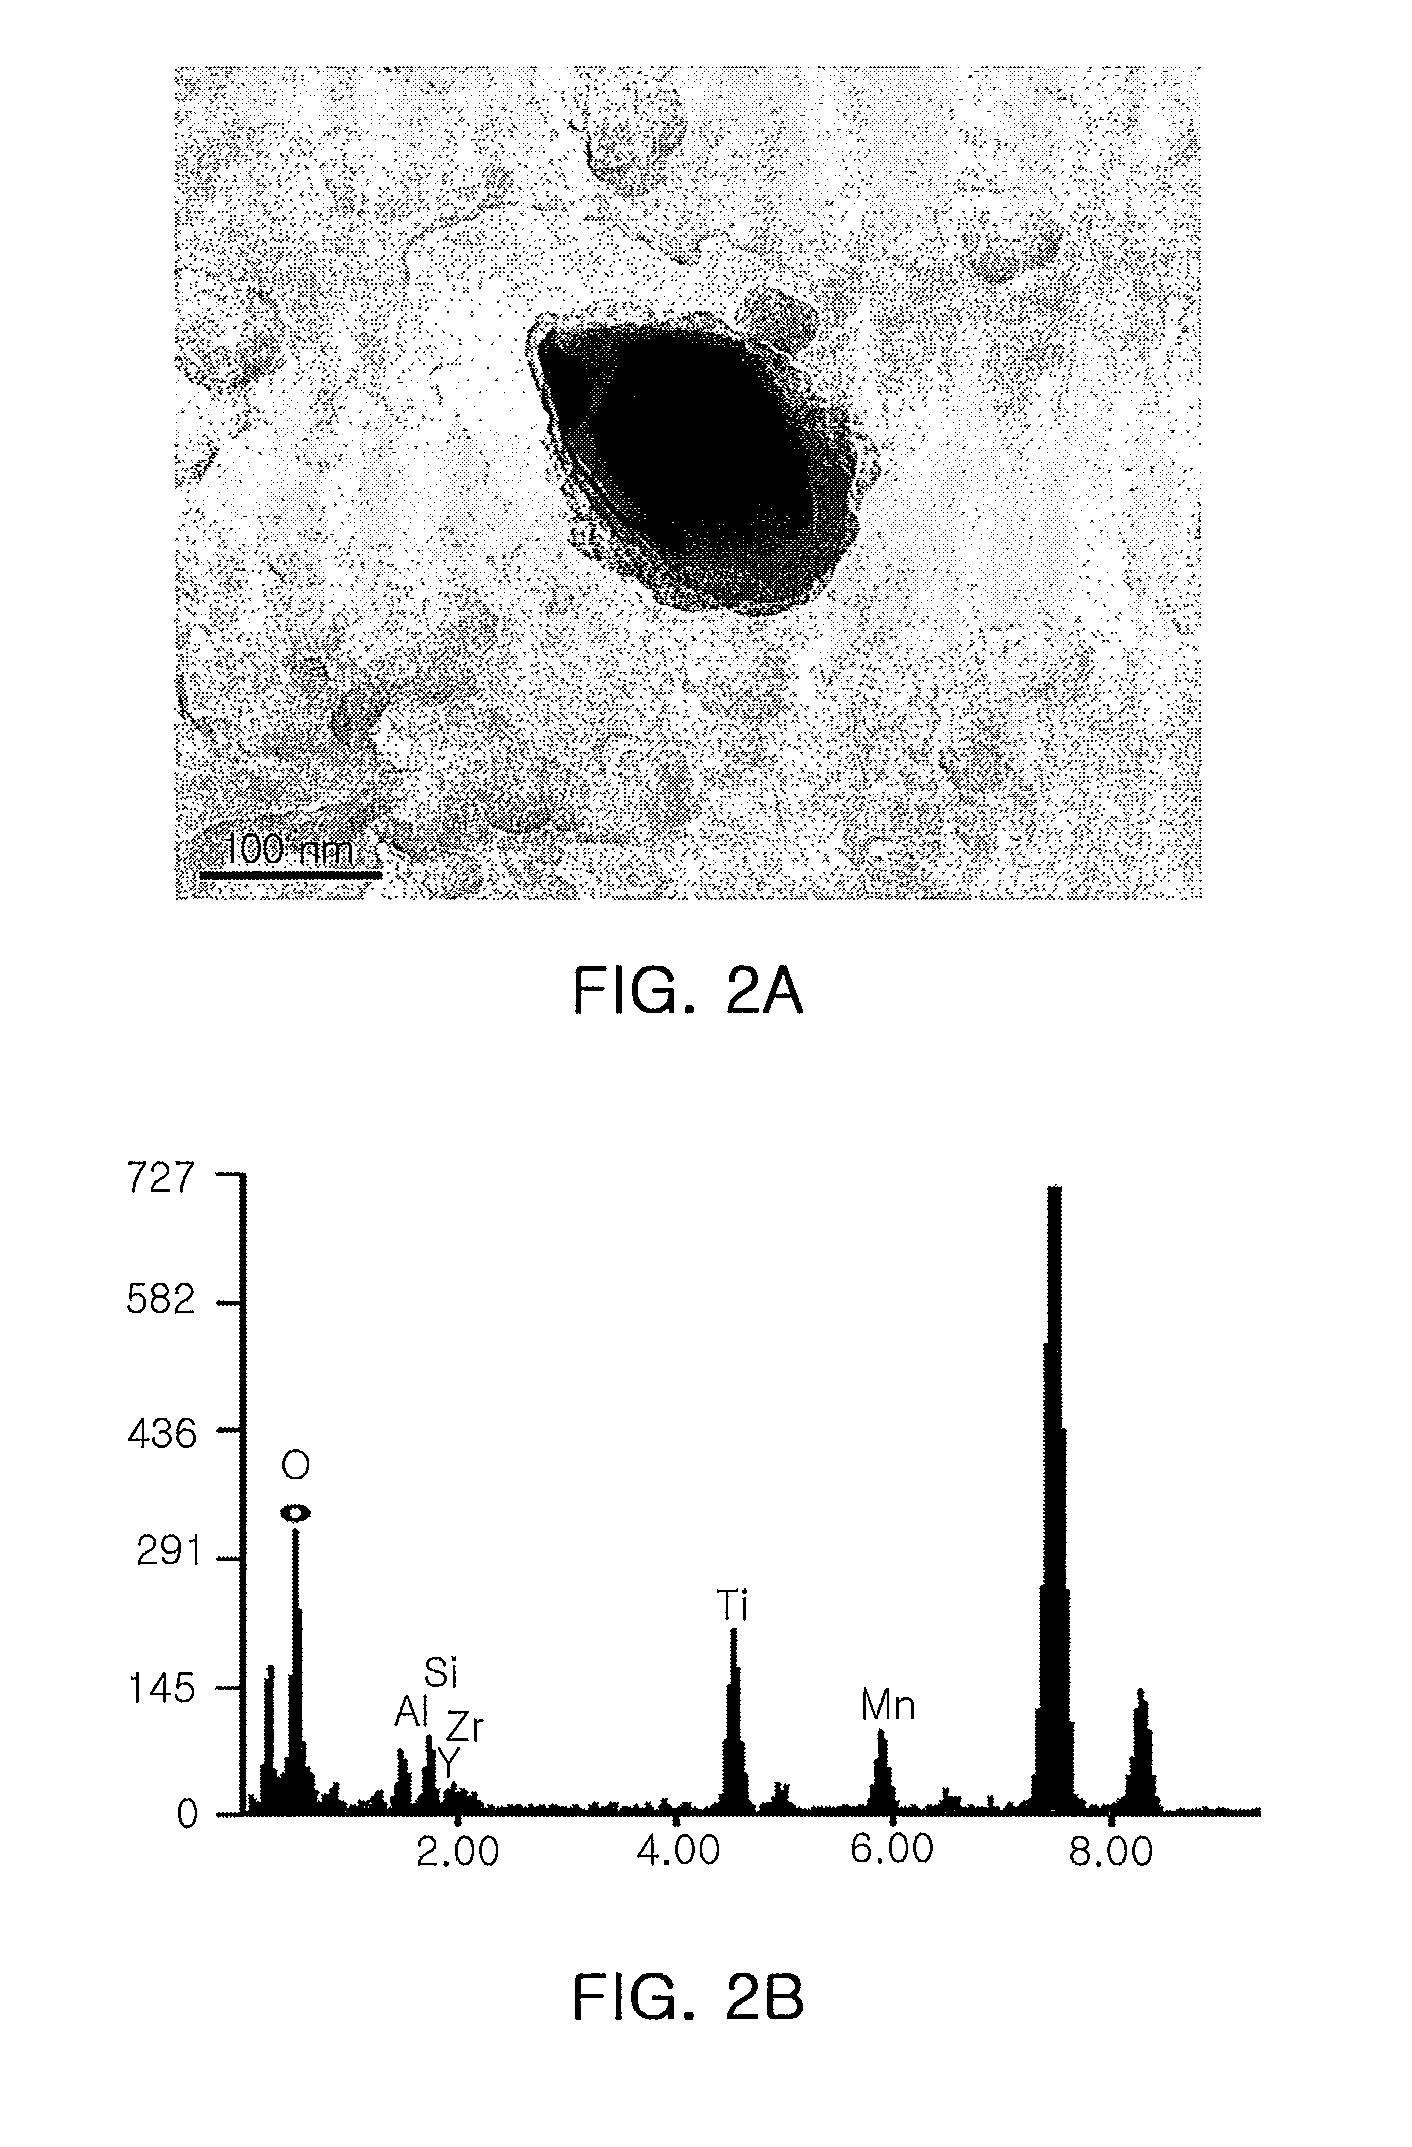 Flux-cored arc welding wire for providing superior toughness and weldability to a welded joint at a low temperature, and welded joint using same